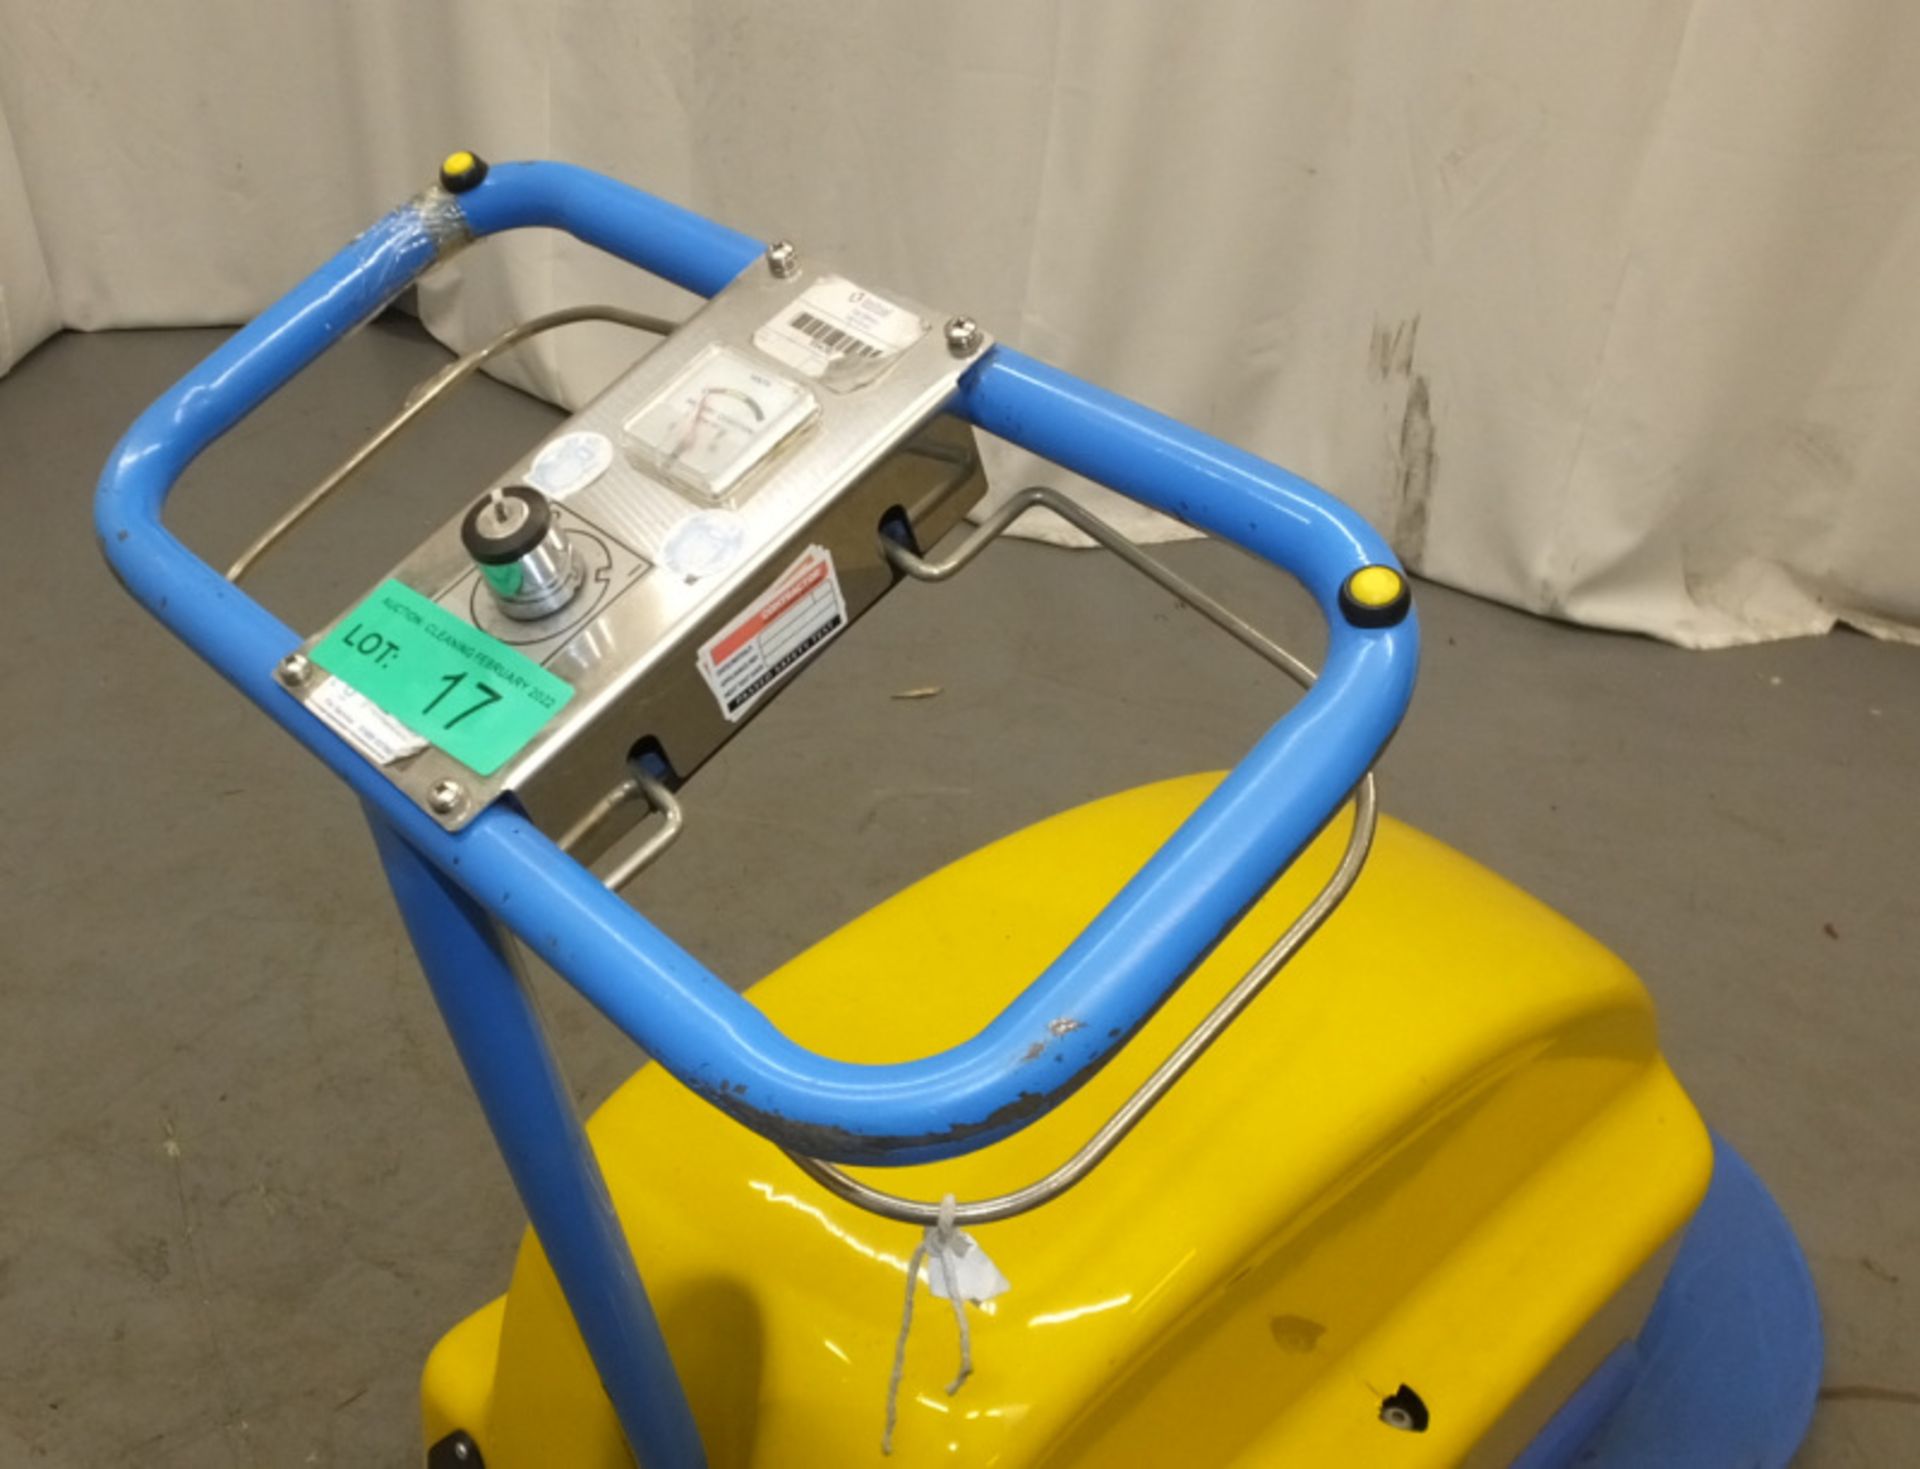 Tennant Challenger Nippy 500 Walk-Behind Floor Cleaner - no key - cracked casing as seen in pictures - Image 6 of 9